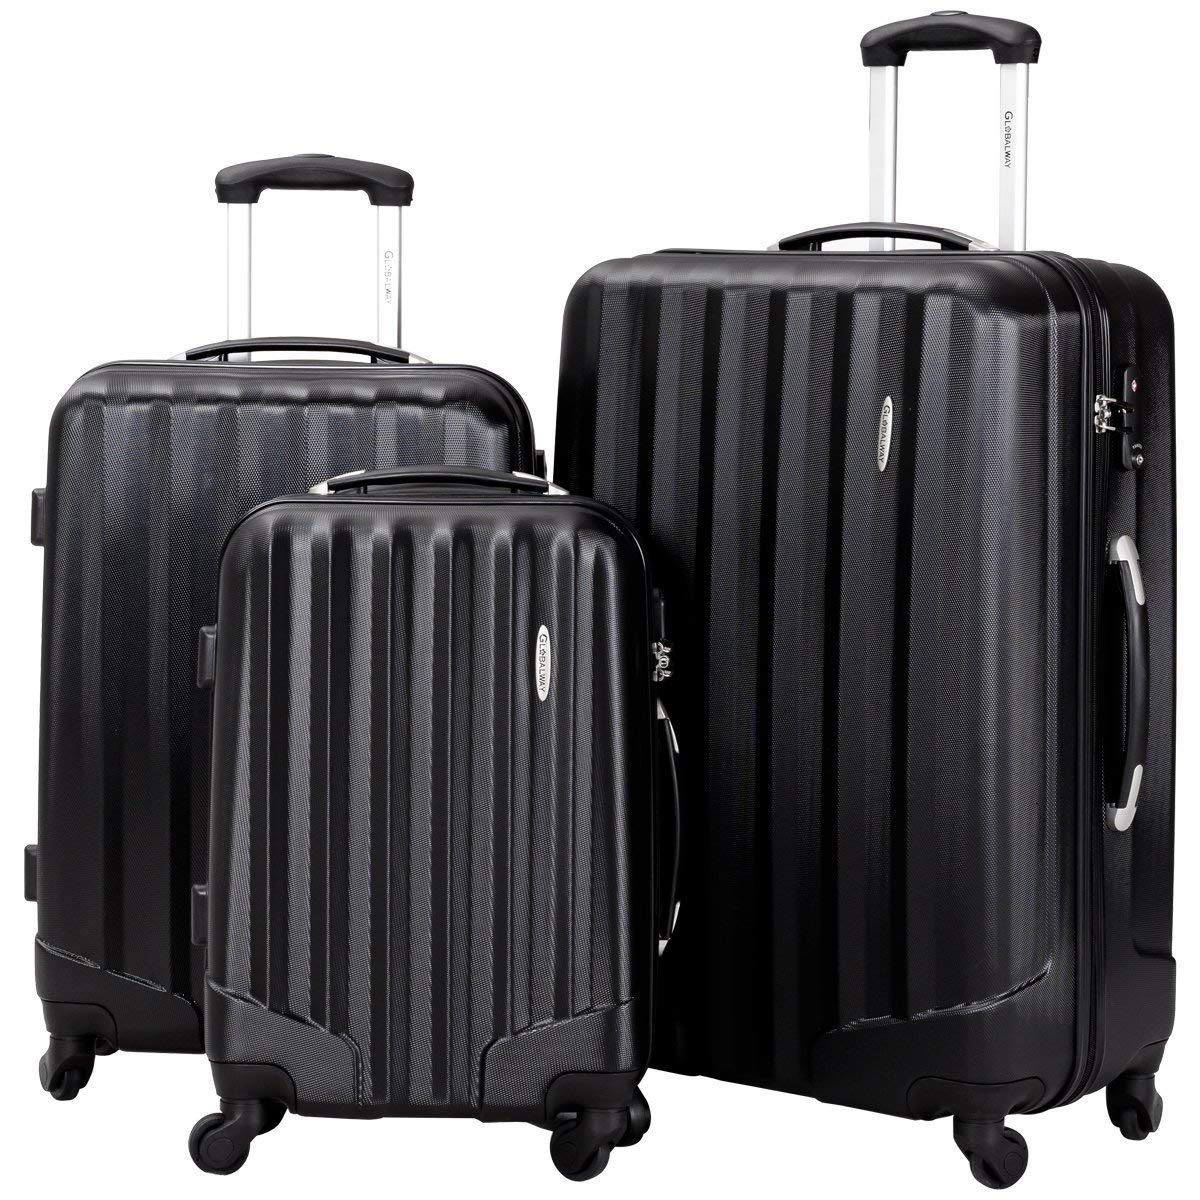 Luggage Sets for Frequent Travelers: Your Buyer’s Guide | Heavy.com